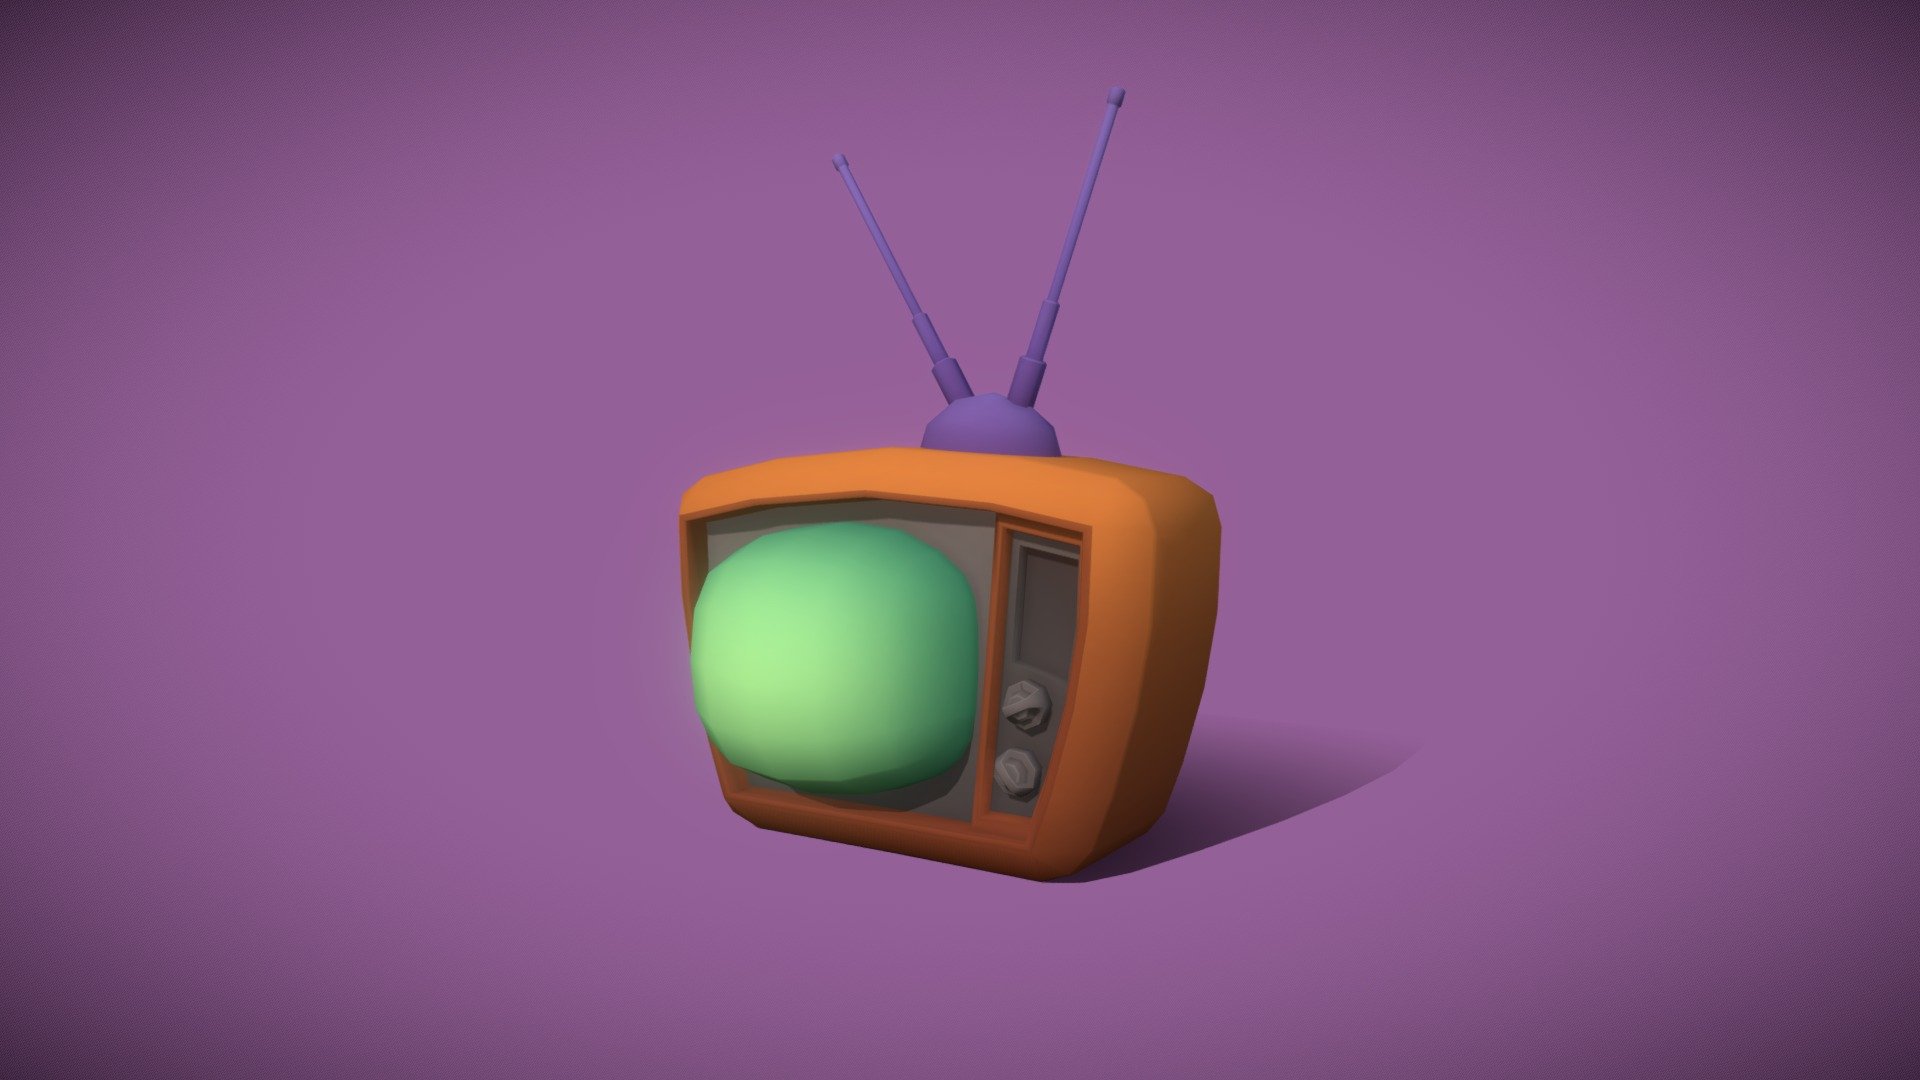 Free game ready low poly Old TV in cartoon style. Blender3d.
https://sketchfab.com/3d-models/game-ready-furniture-cartoon-style-asset-d5923de9ad6c49a8ac7a6c5004a35f08 - You can buy full cartoon furniture asset here.
If u like it and if u download it - hit the like button please! :) - game ready low poly old tv cartoon style model - Download Free 3D model by Sergi Trojanski (@nathramn) 3d model